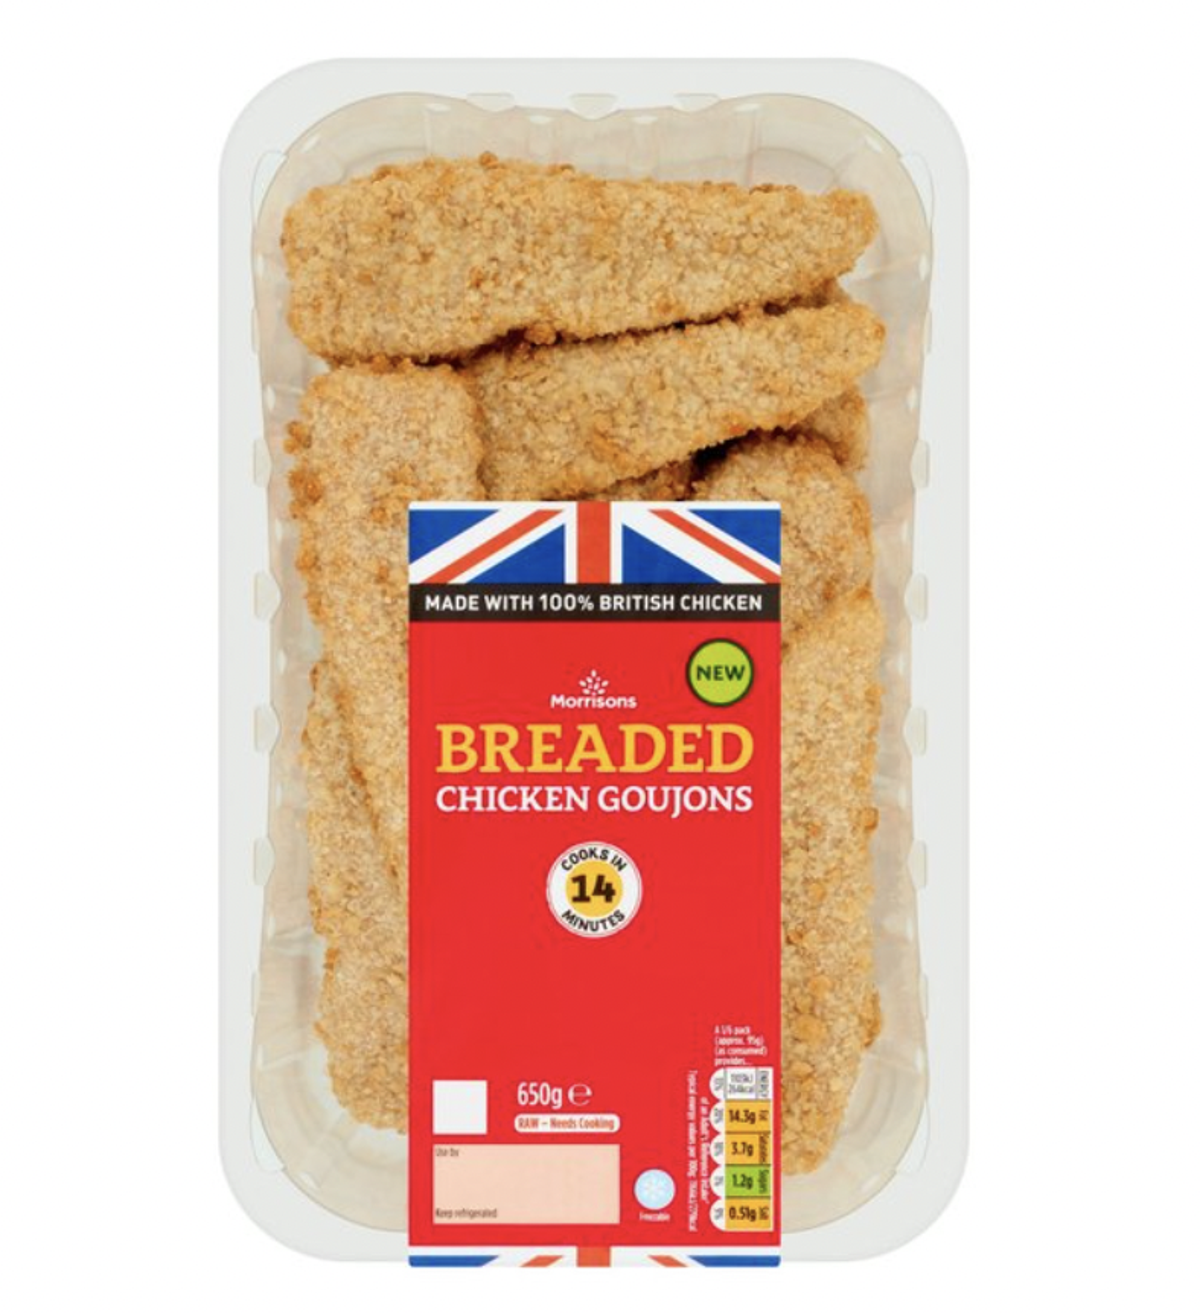 Morrisons recall several breaded chicken products because they may contain small pieces of glass